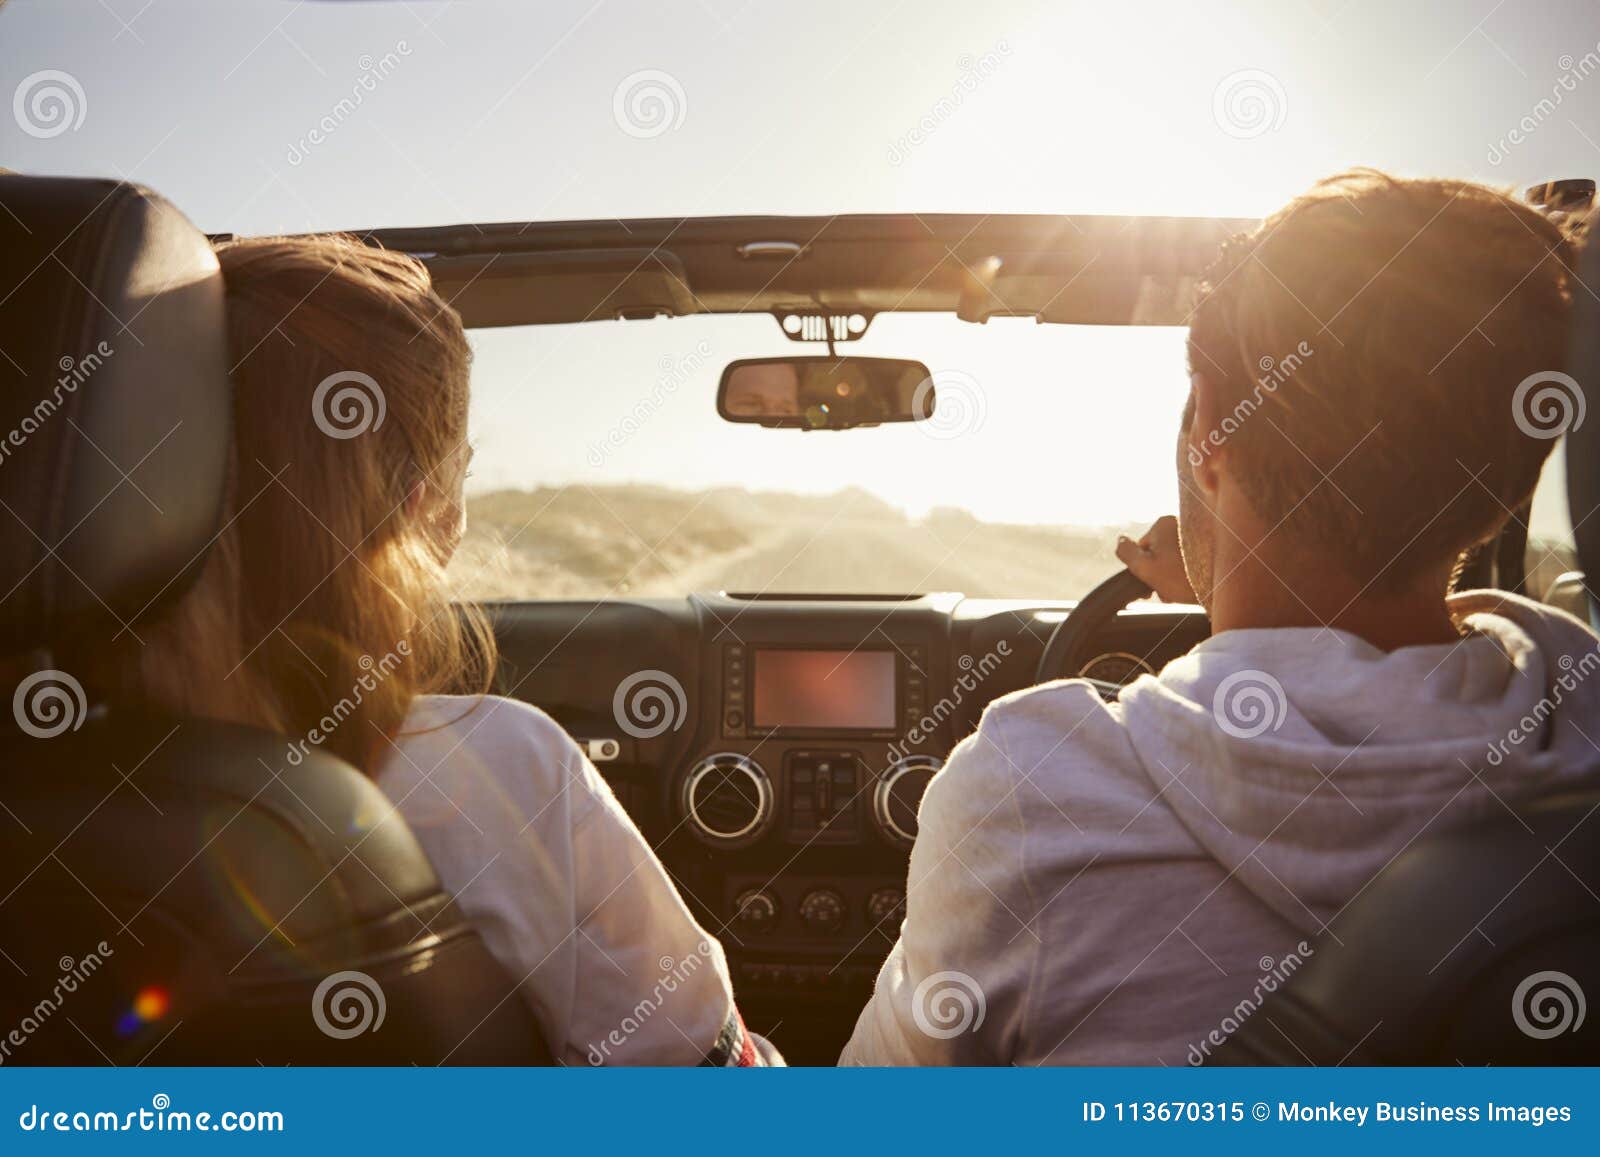 young couple driving with sunroof open, rear passenger pov